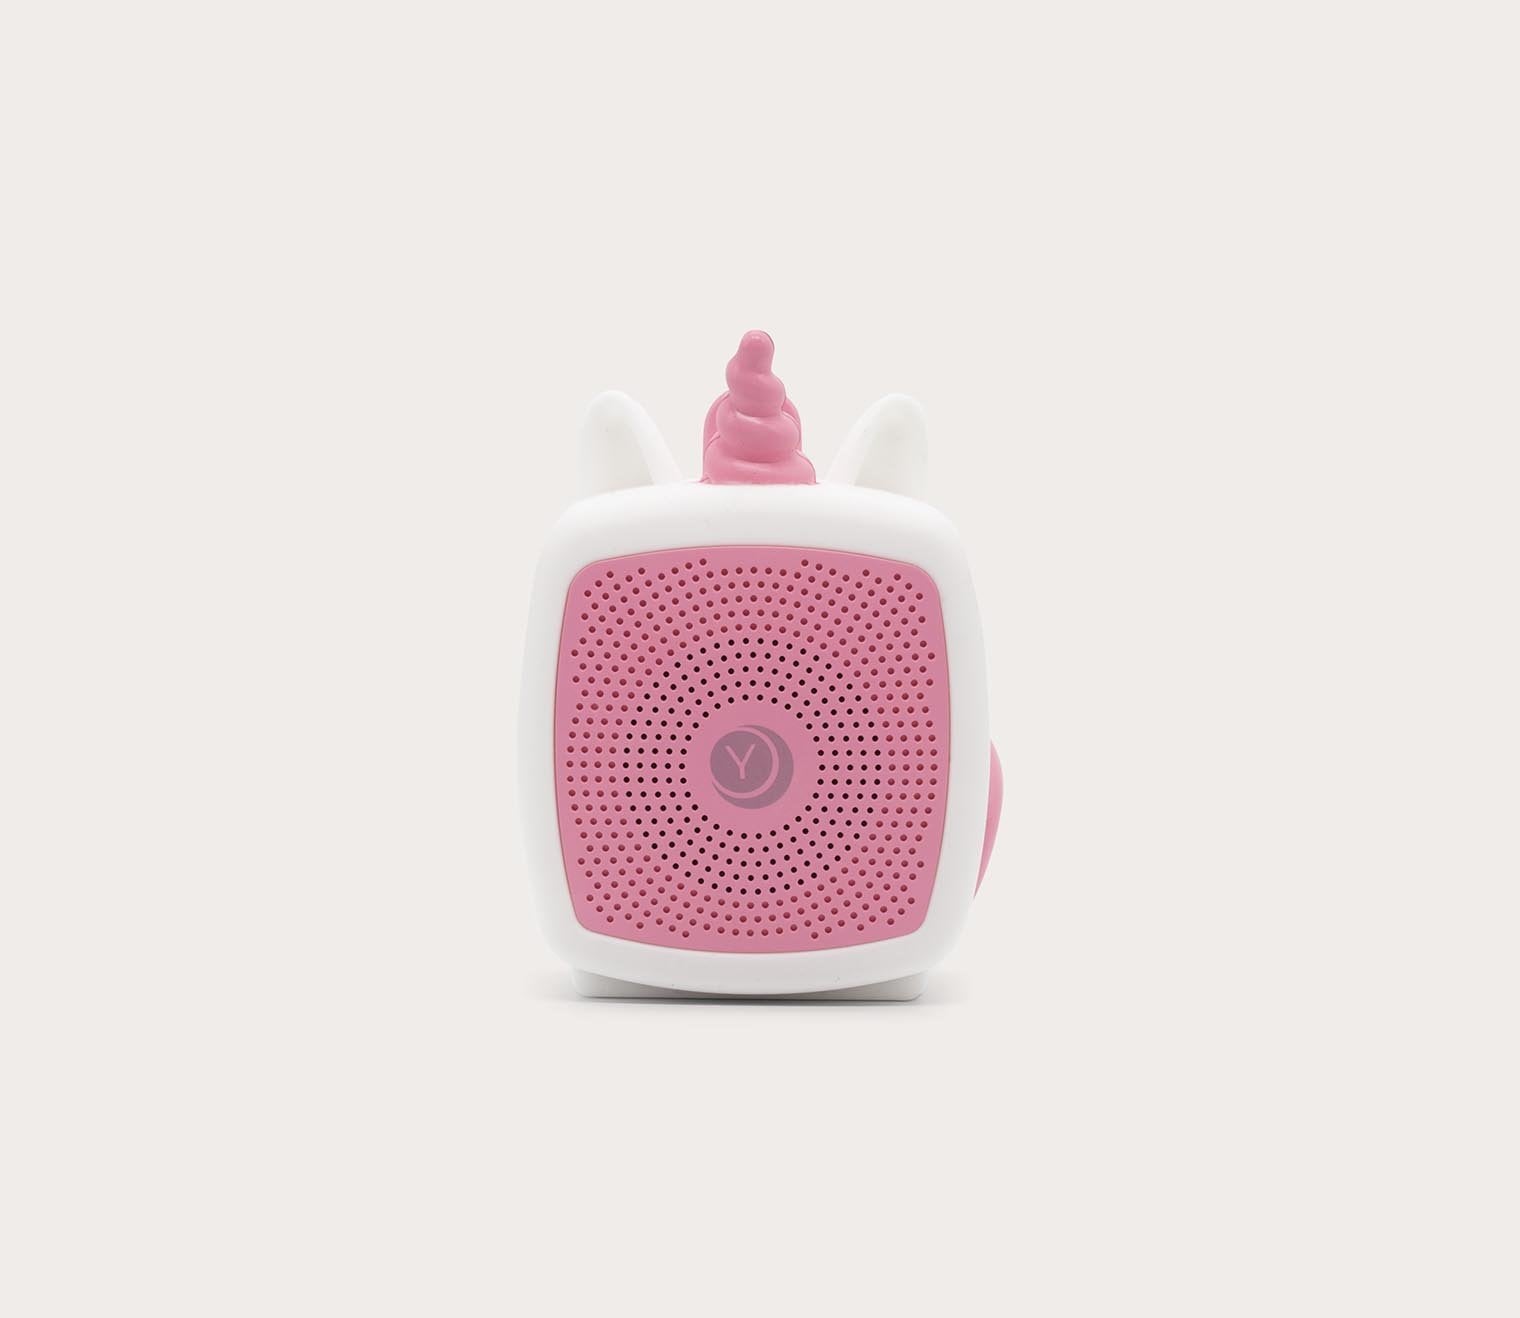 Unicorn Pocket Baby Sound Soother by Yogasleep